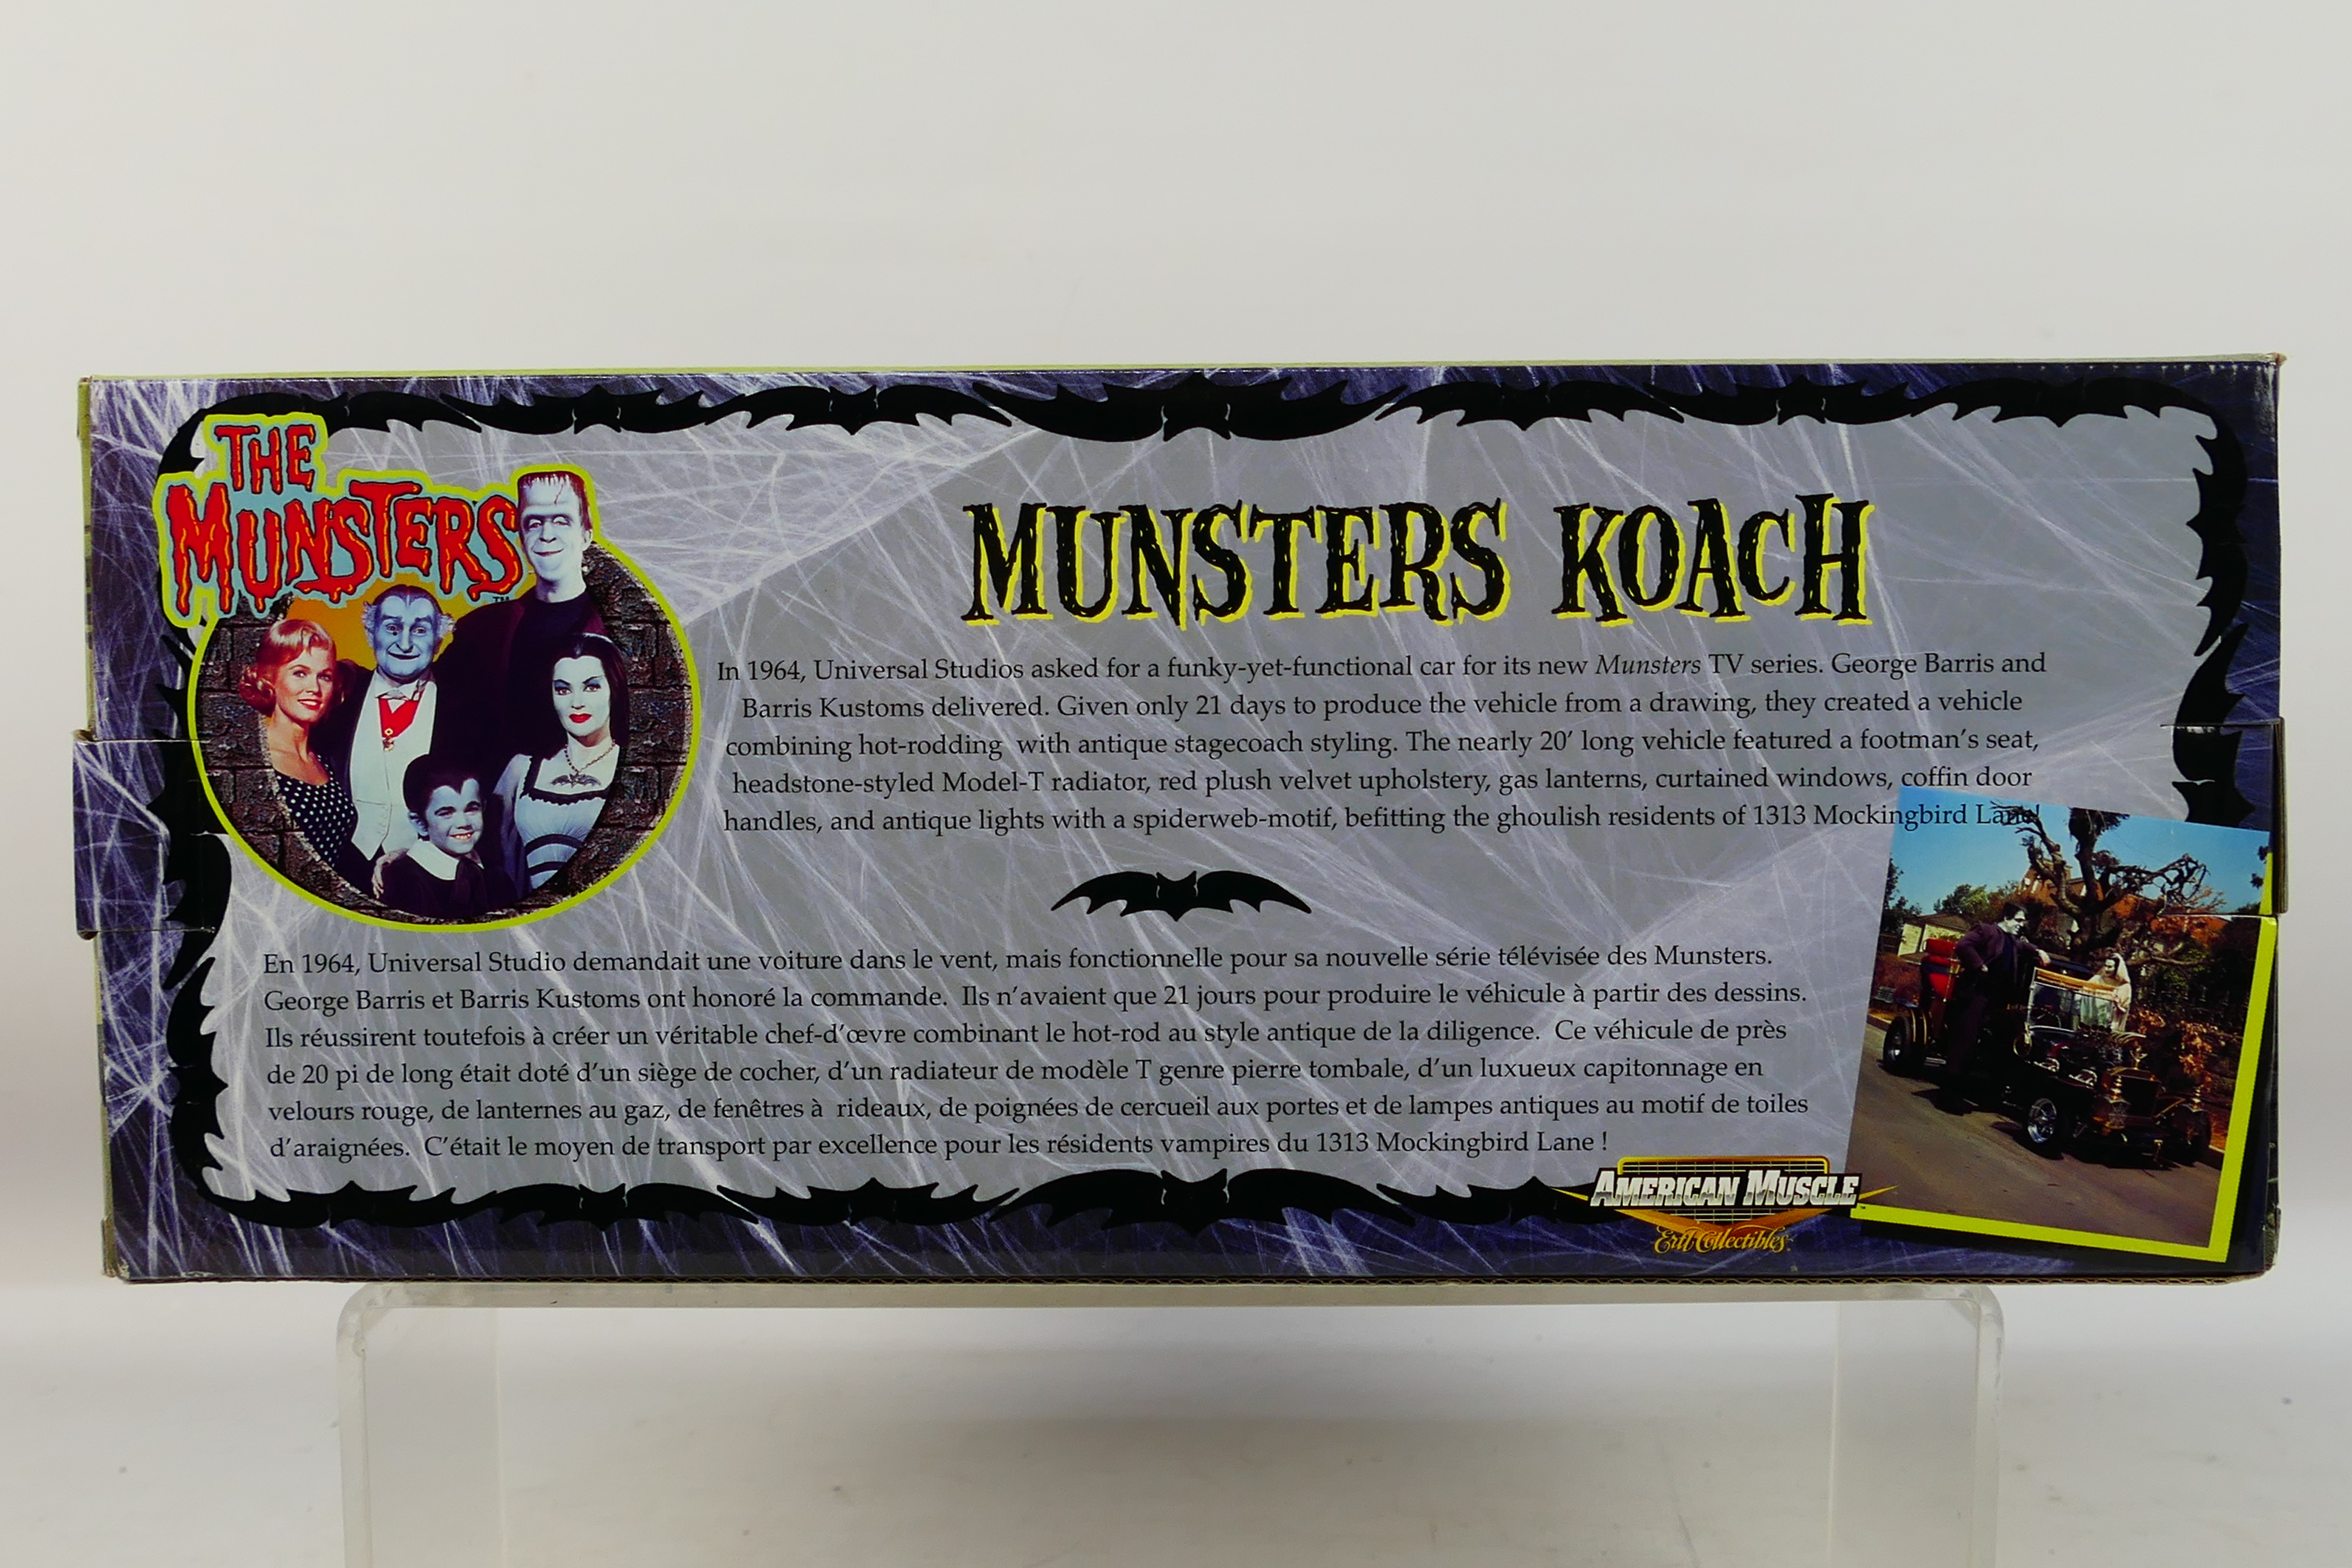 Ertl - A boxed 1:18 scale Ertl 'American Muscle' #36685 'Munsters Koach'. - Image 5 of 6